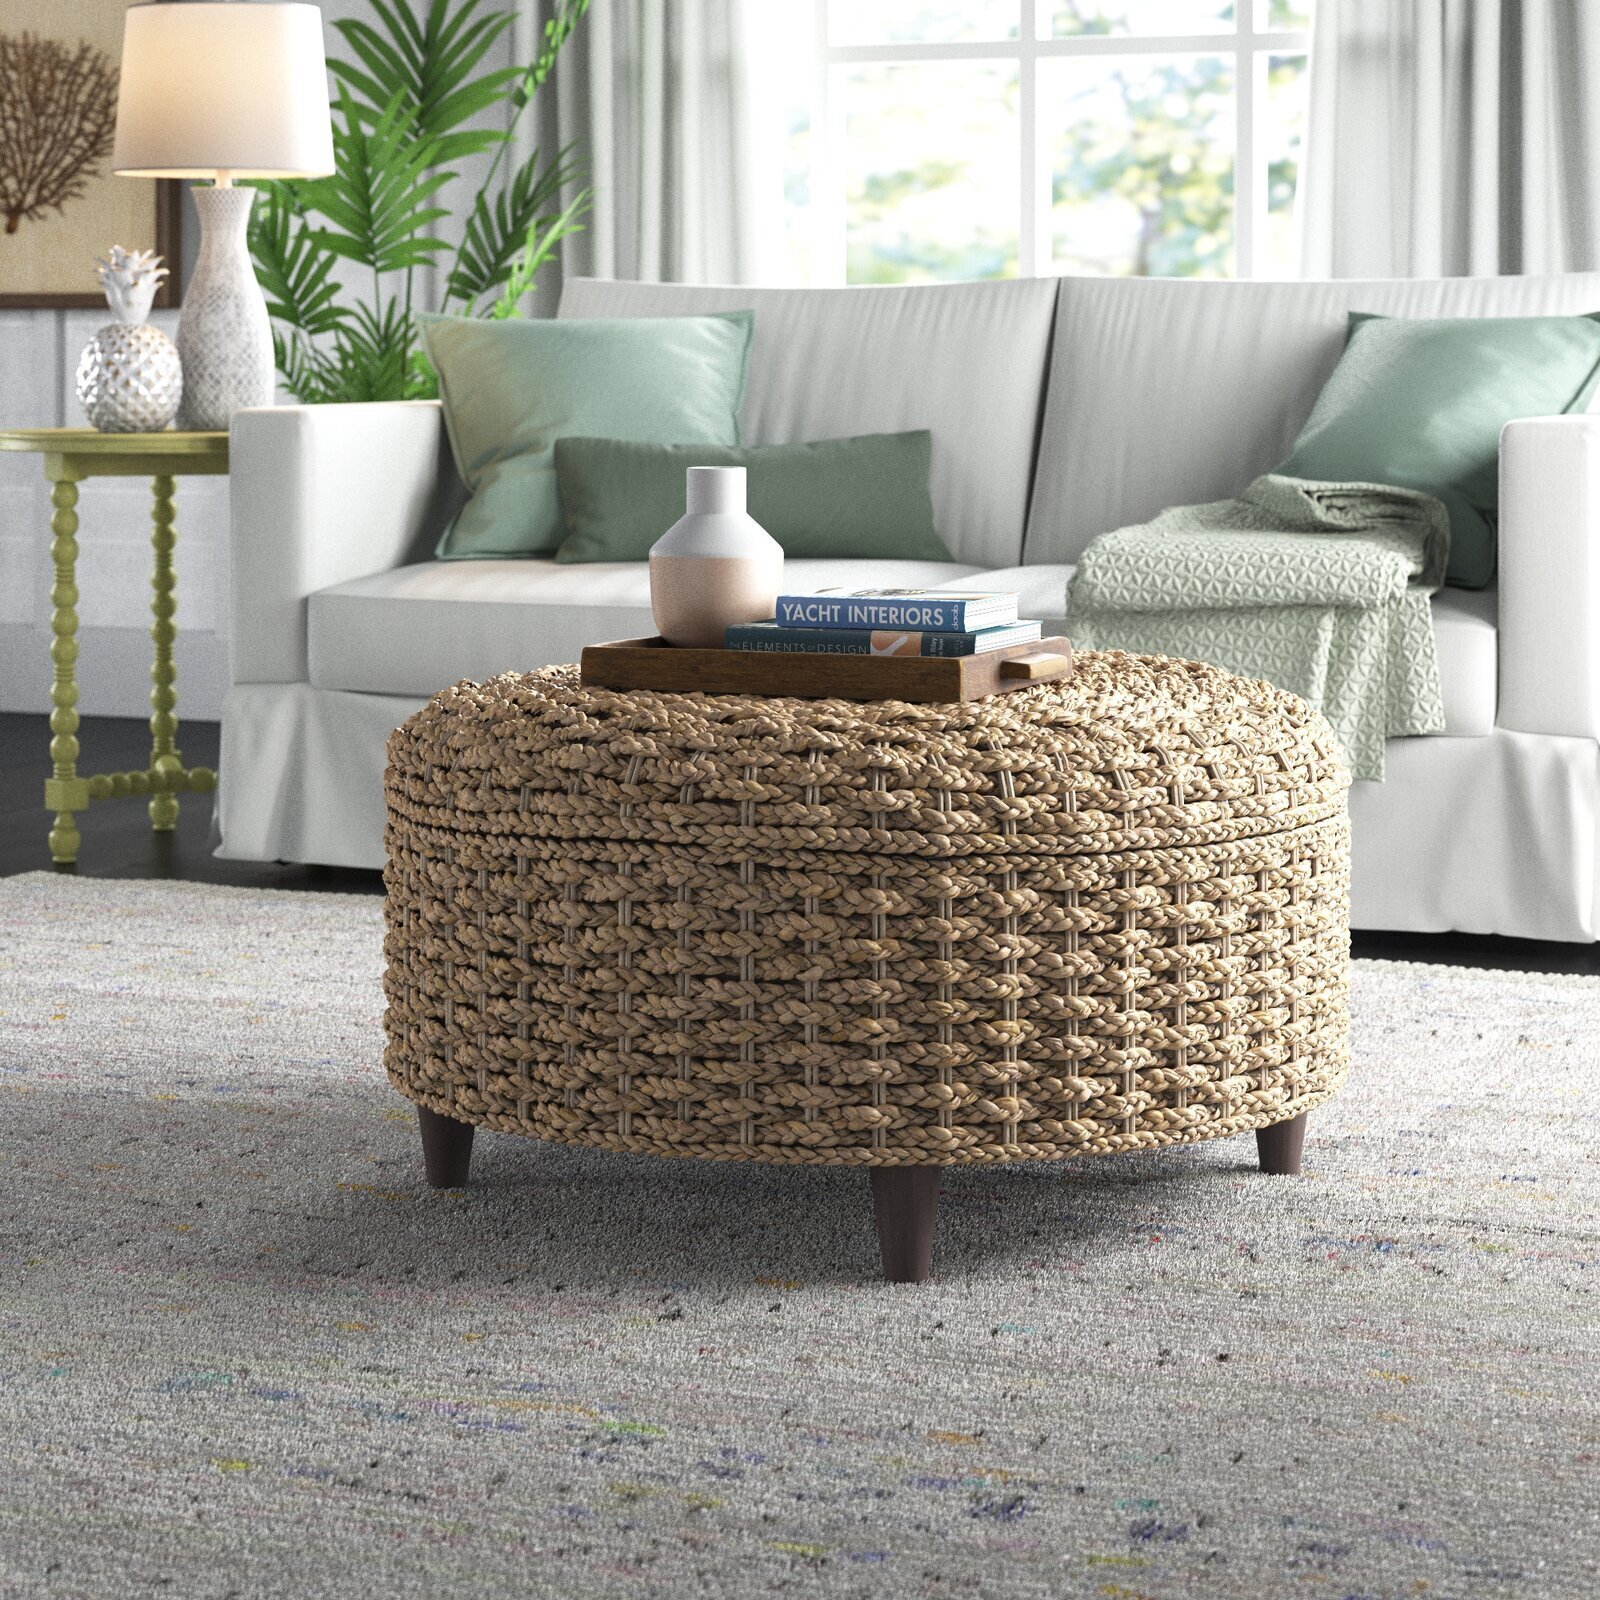 Round Storage Ottoman Coffee Table Made of Water Hyacinth